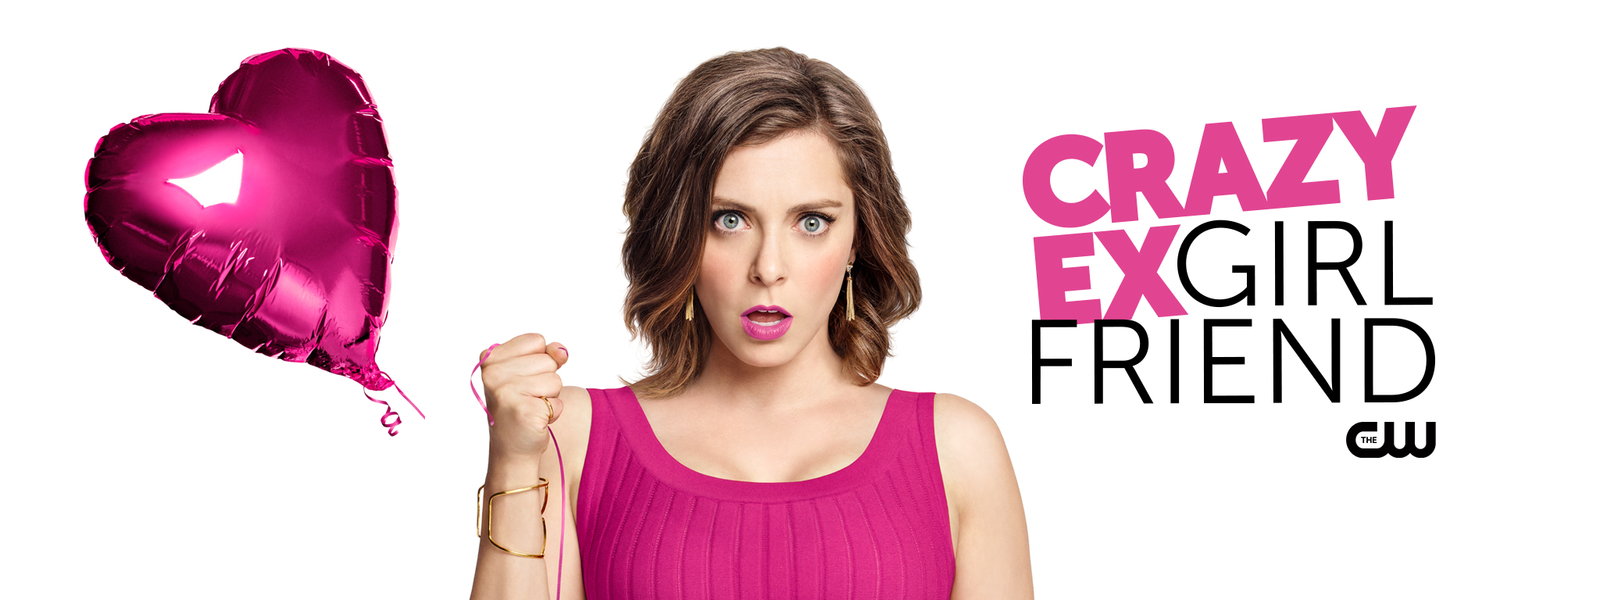 Crazy Ex Girlfriend Pokes Fun At Its Sexist Title The Mary Sue